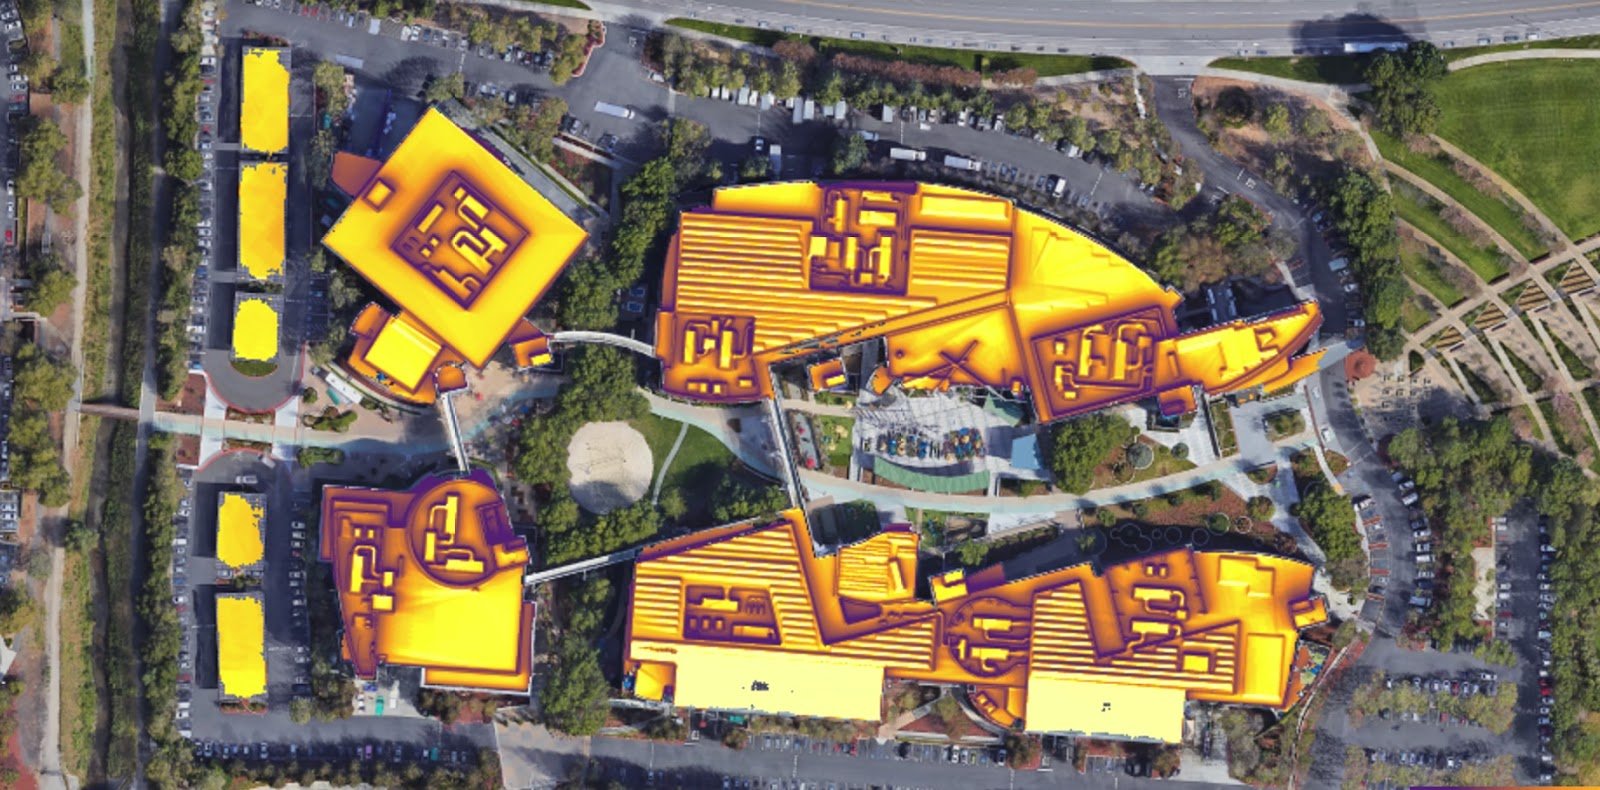 Google's campus in Mountain View, as viewed in Project Sunroof.